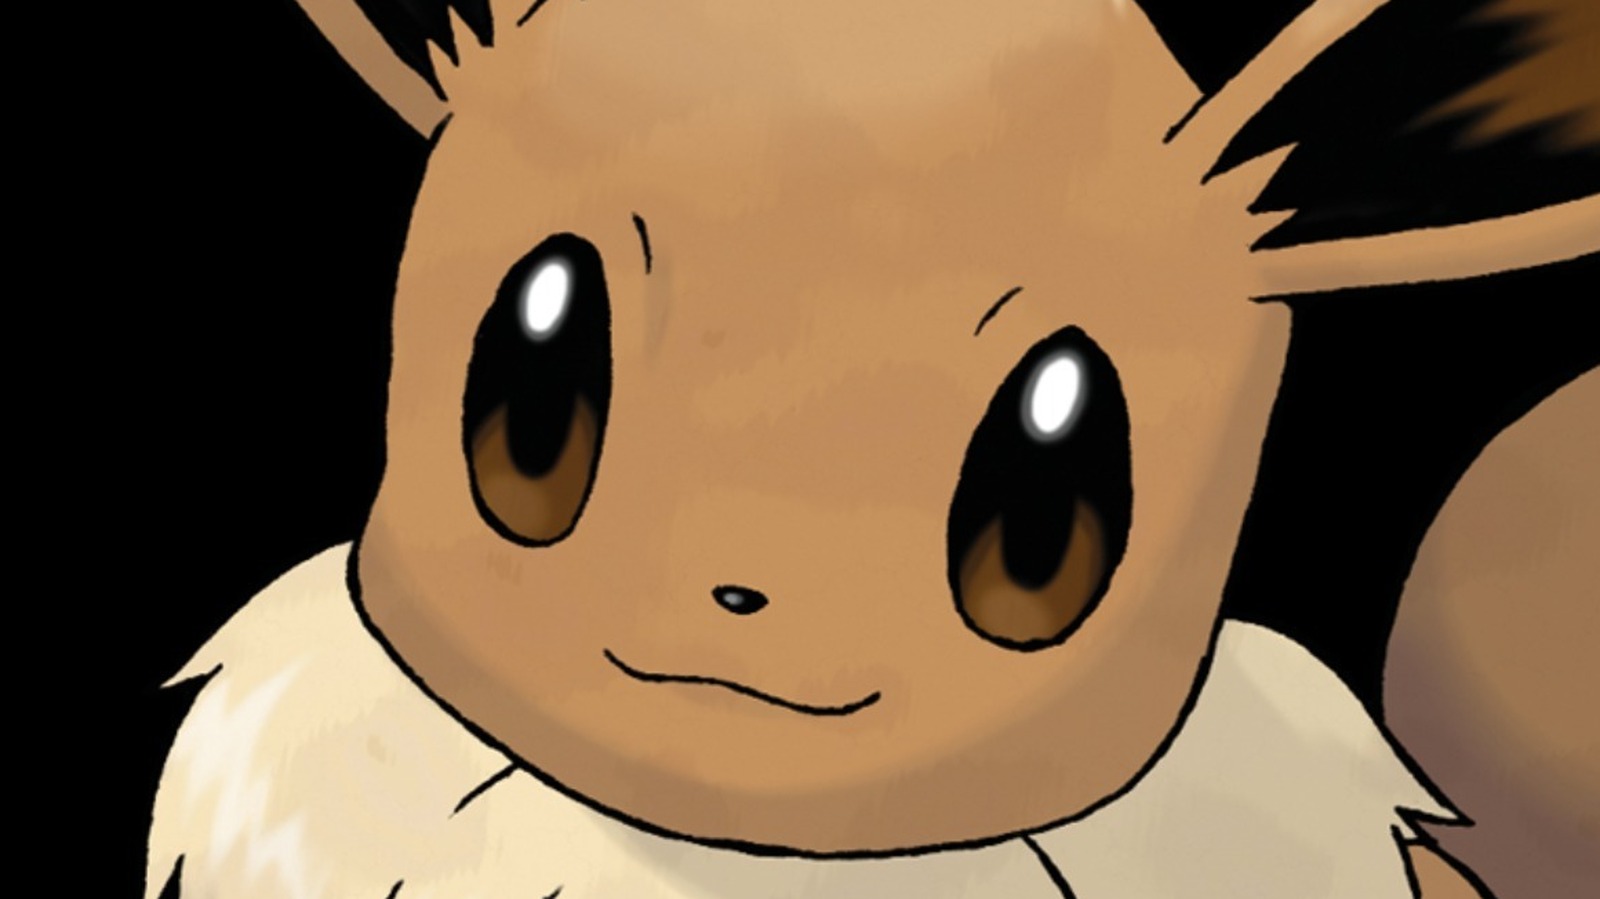 Want to make sure your Eevee evolves into Umbreon or Espeon in the